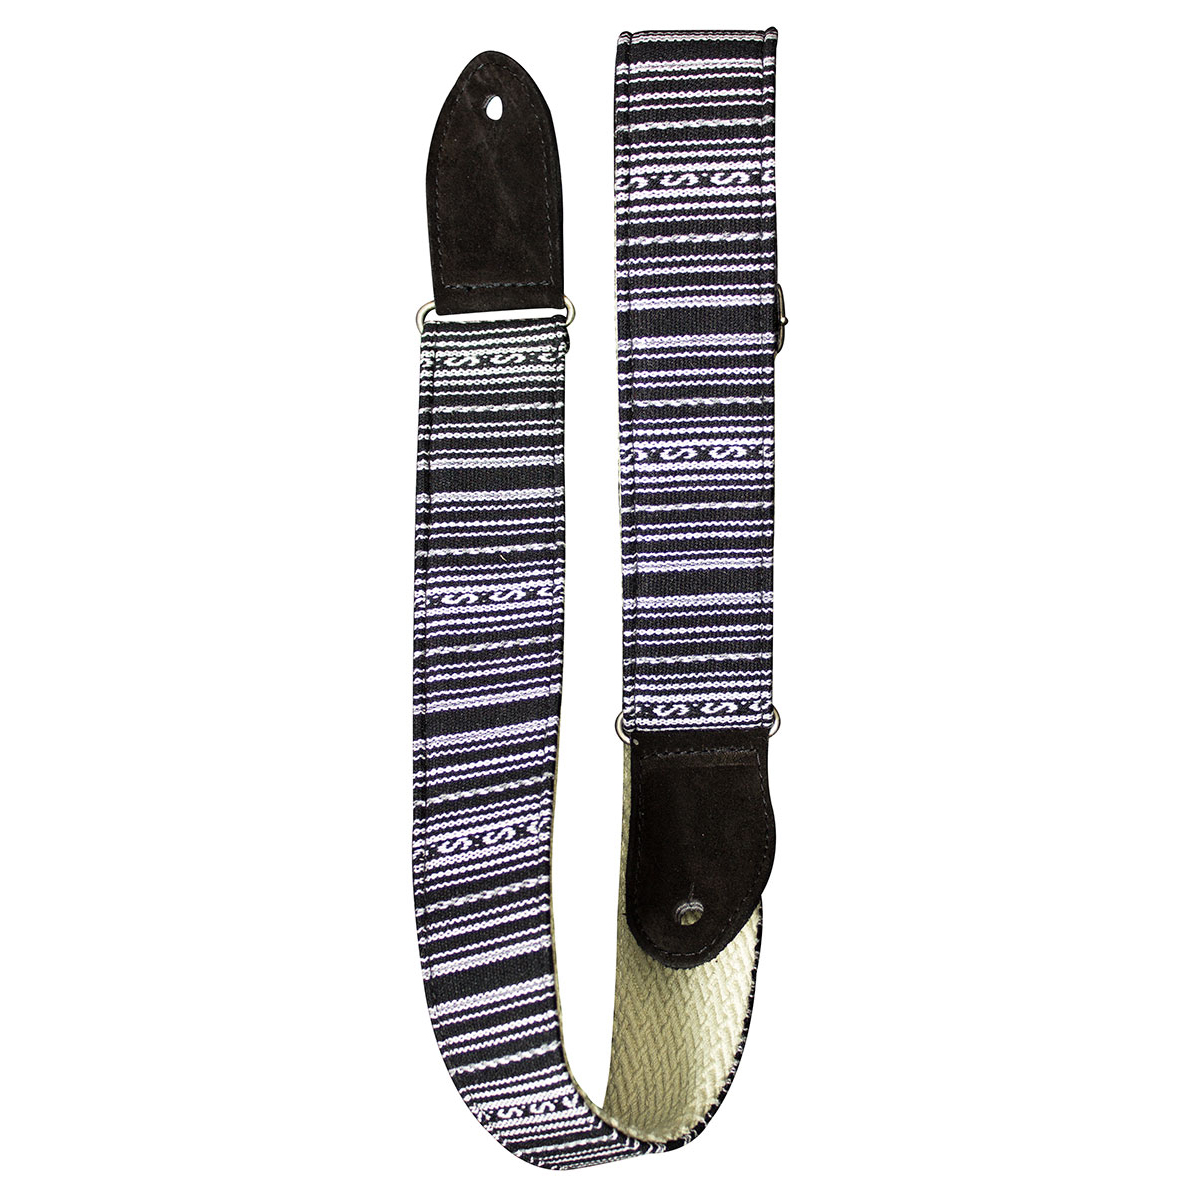 TGI Handcrafted Guitar Strap Inca Black and White